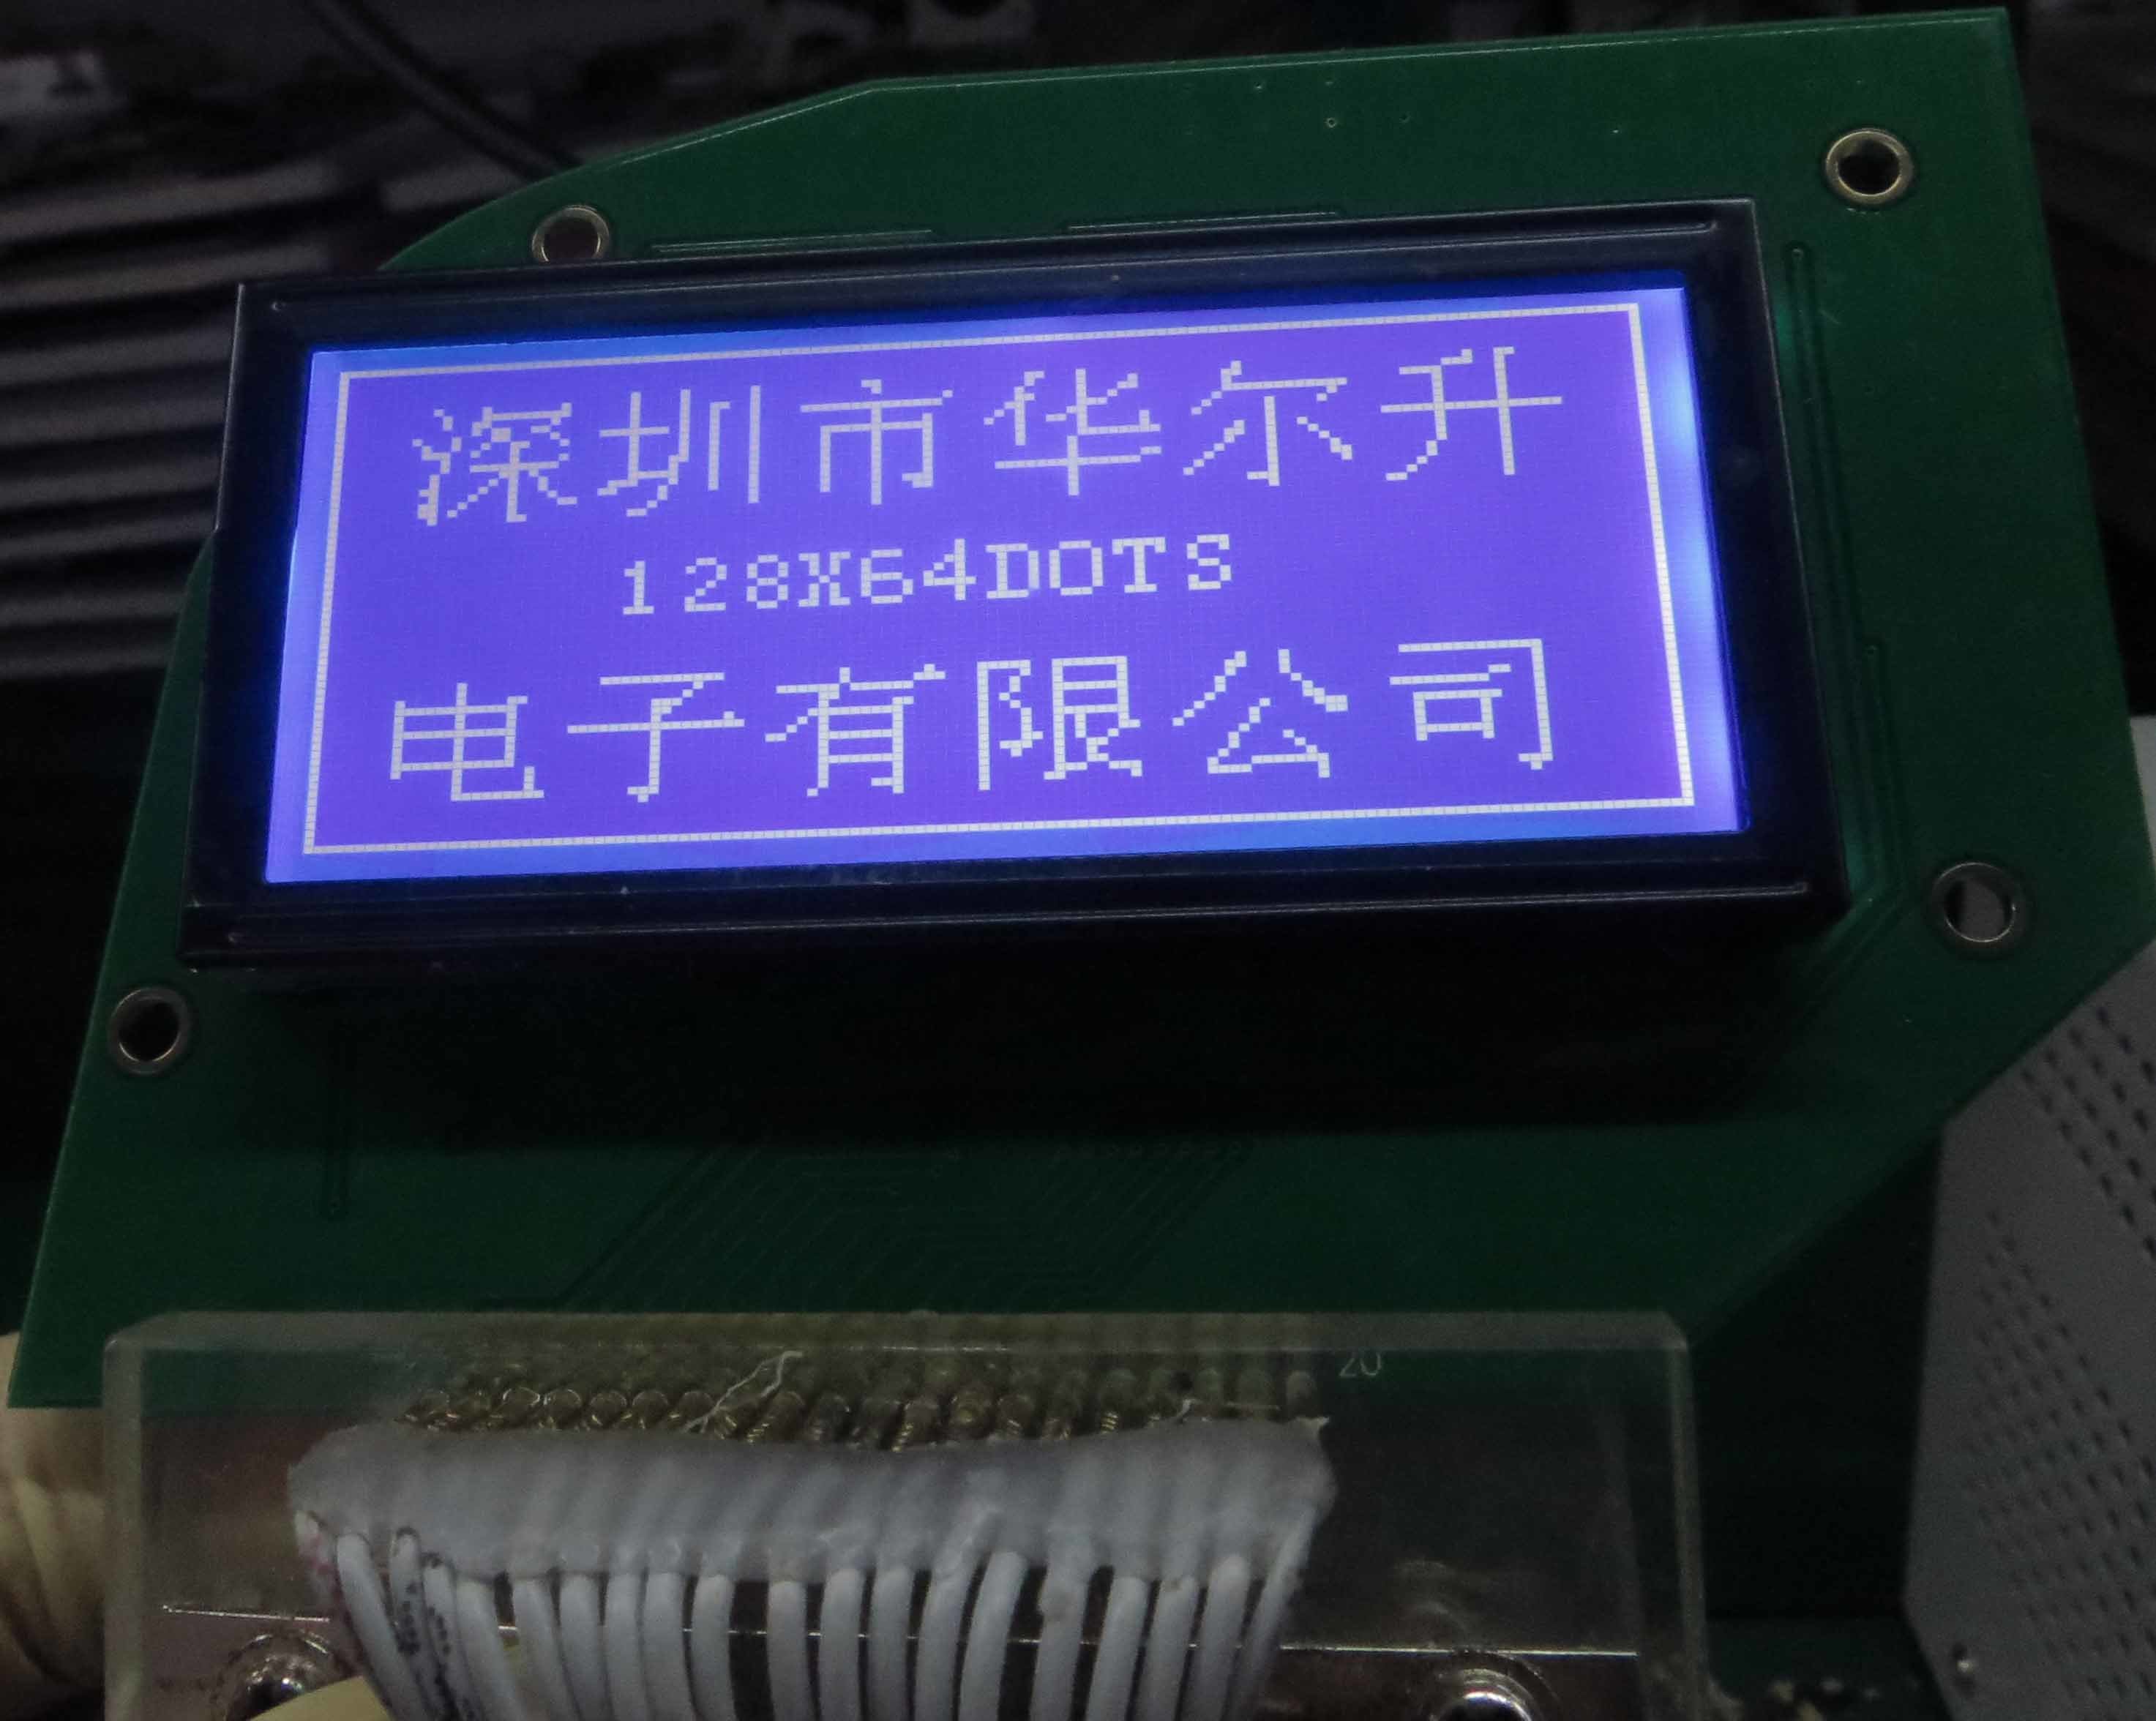 Stn 128*64 LCD Display for Home Applicant